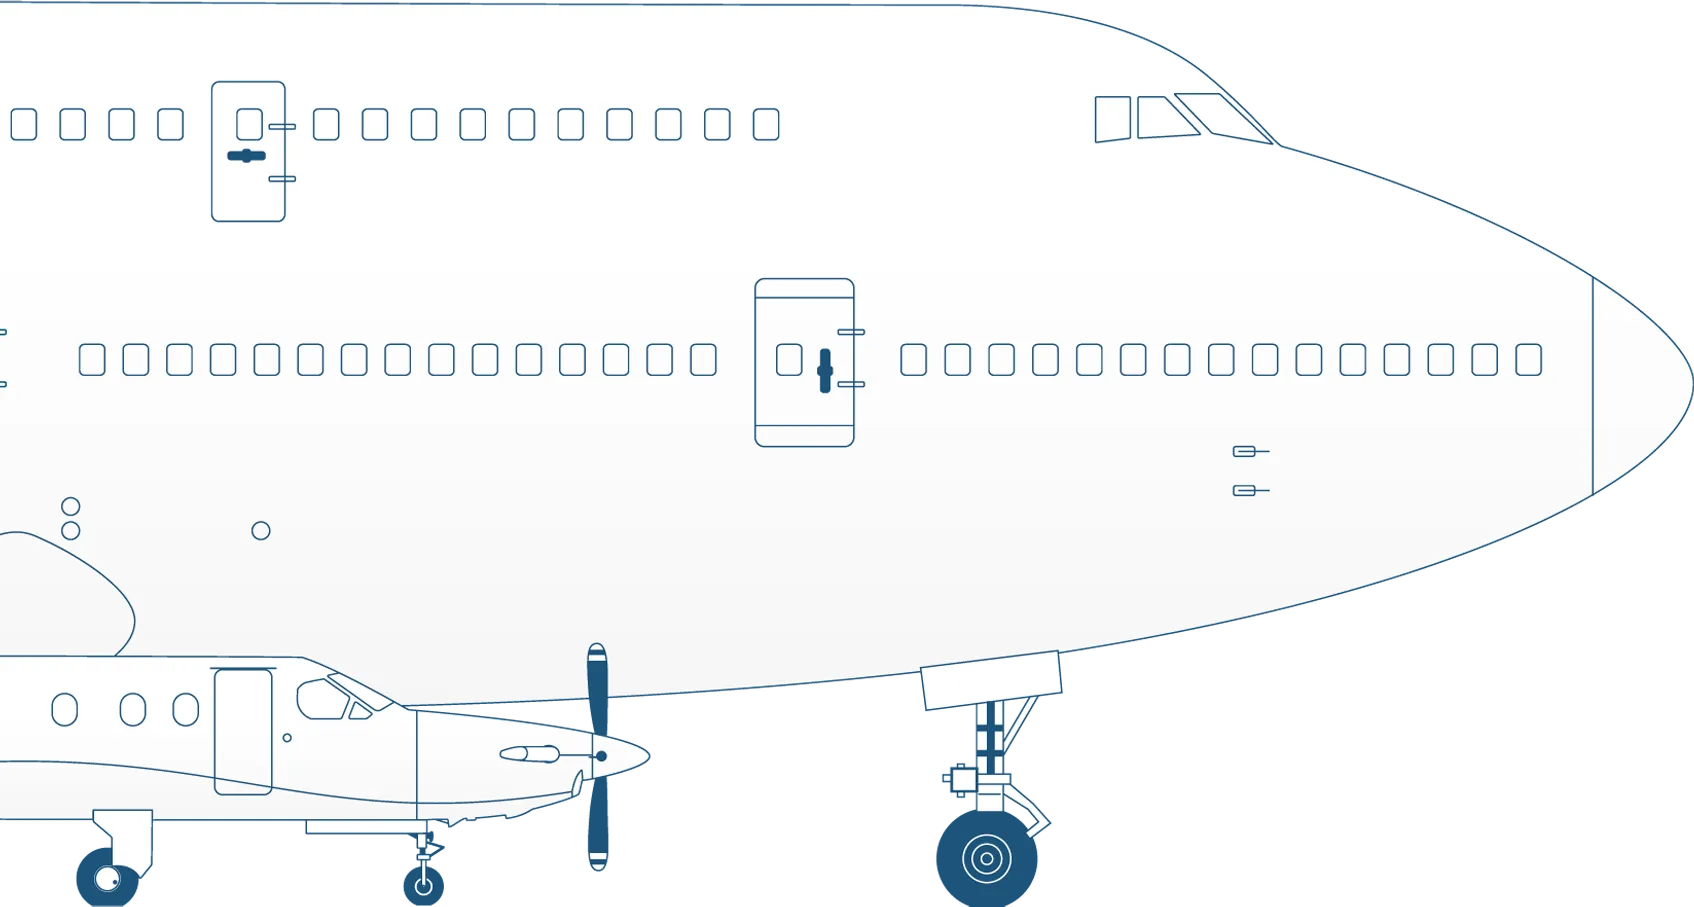 An illustration depicting a Boeing 747 and a Pilatus PC-12 aircraft from the side, showing their size difference